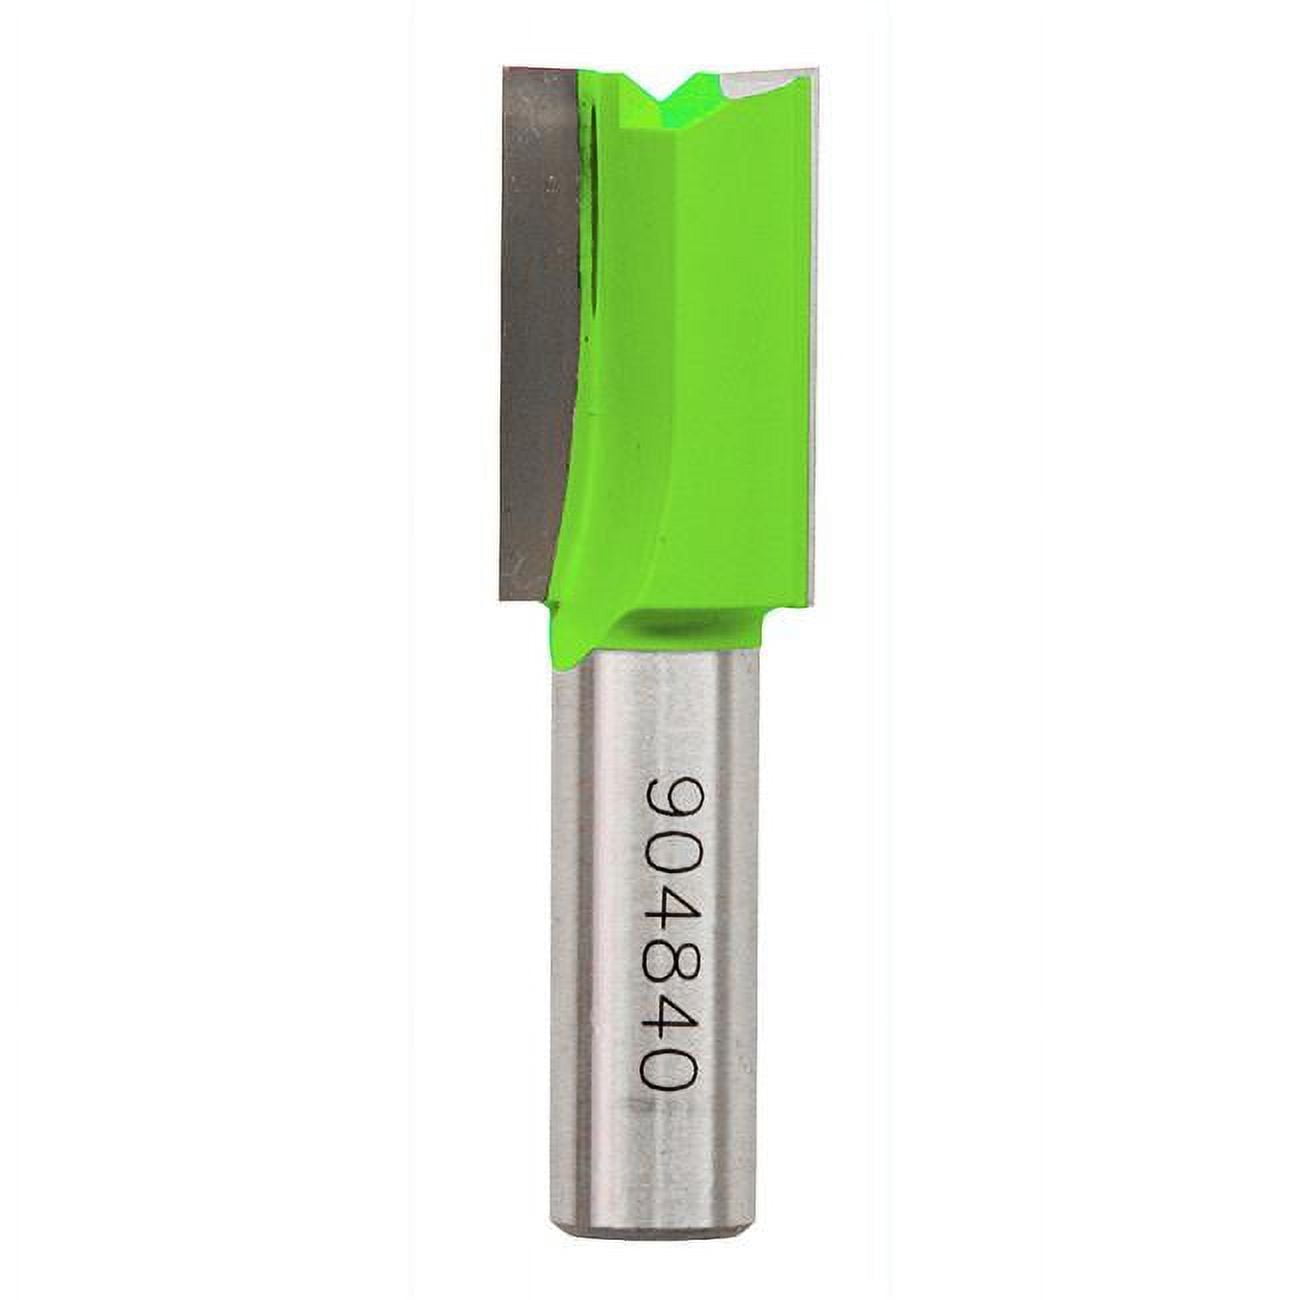 Picture of Exchange-A-Blade 2111052 0.75 x 0.5 in. Shank Straight Professional Router Bit - Recyclable Exchangeable